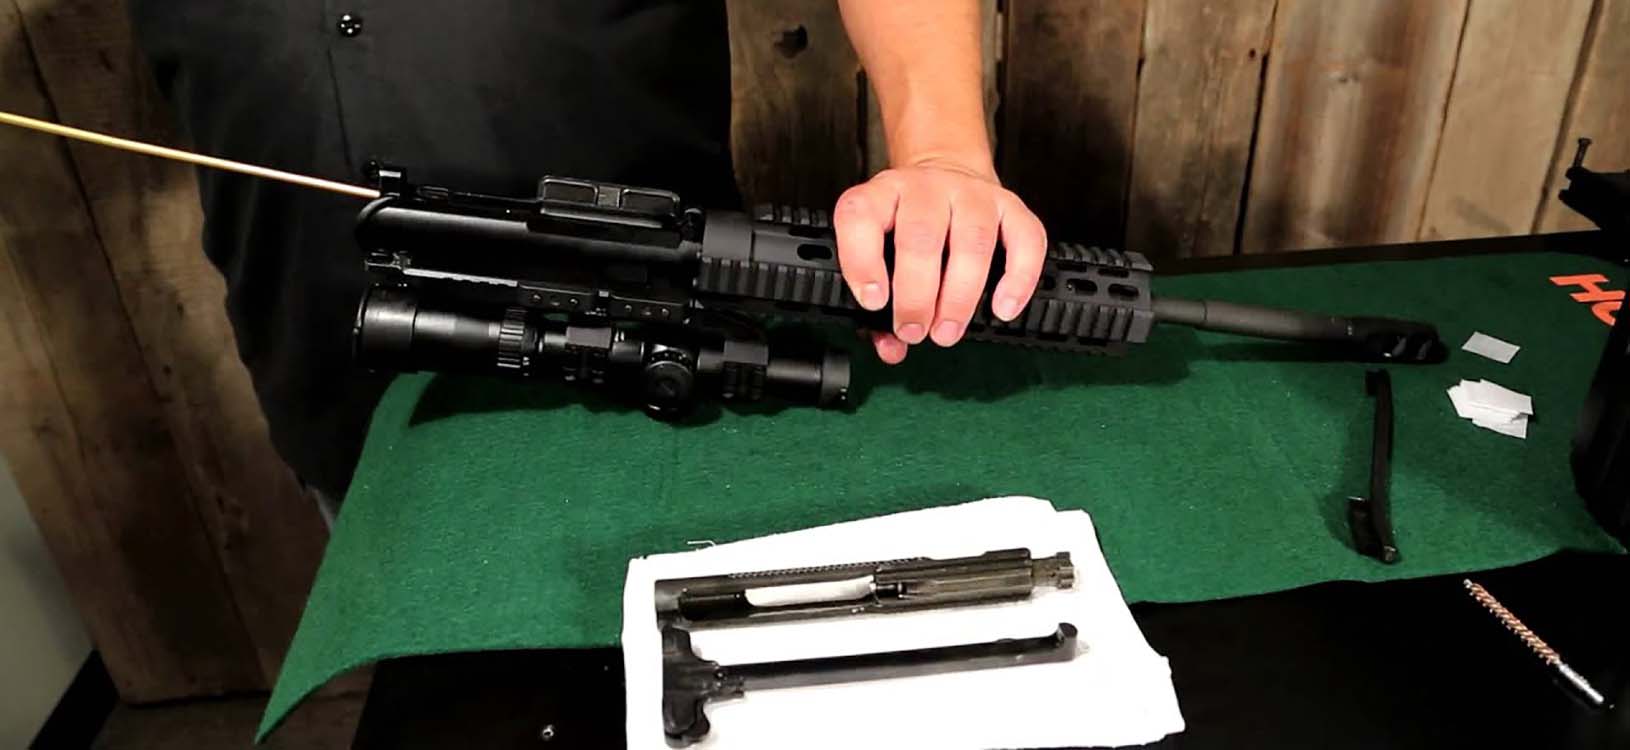 How To Clean an AR-15 Quick and Easy?